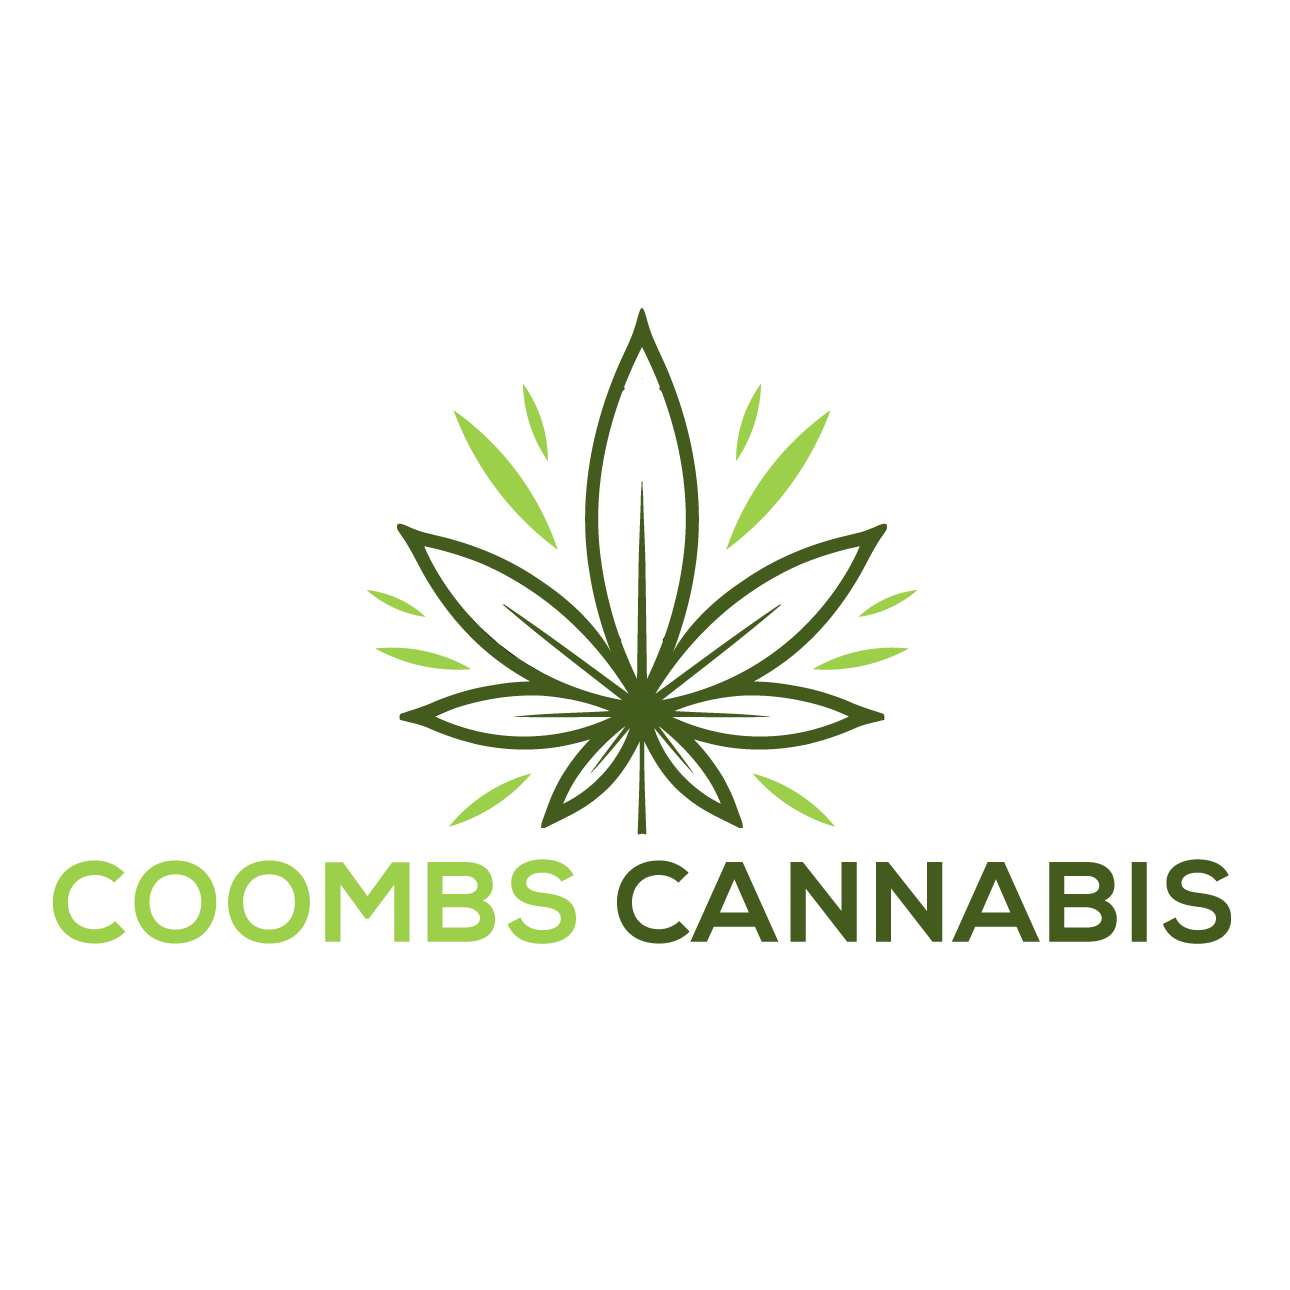 Coombs Cannabis